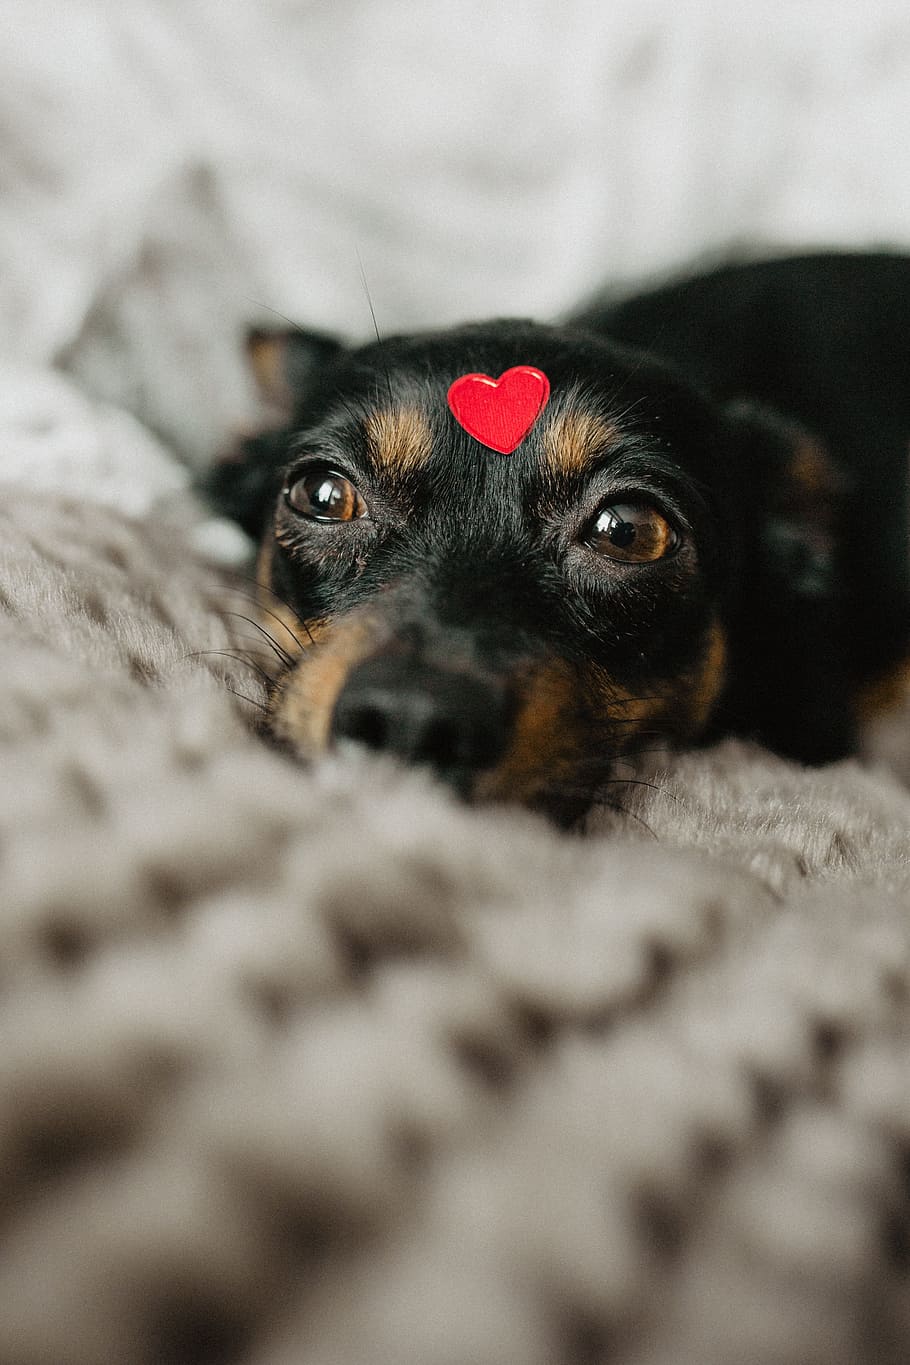 HD wallpaper: A dog with heart on head, pet, animal, cute